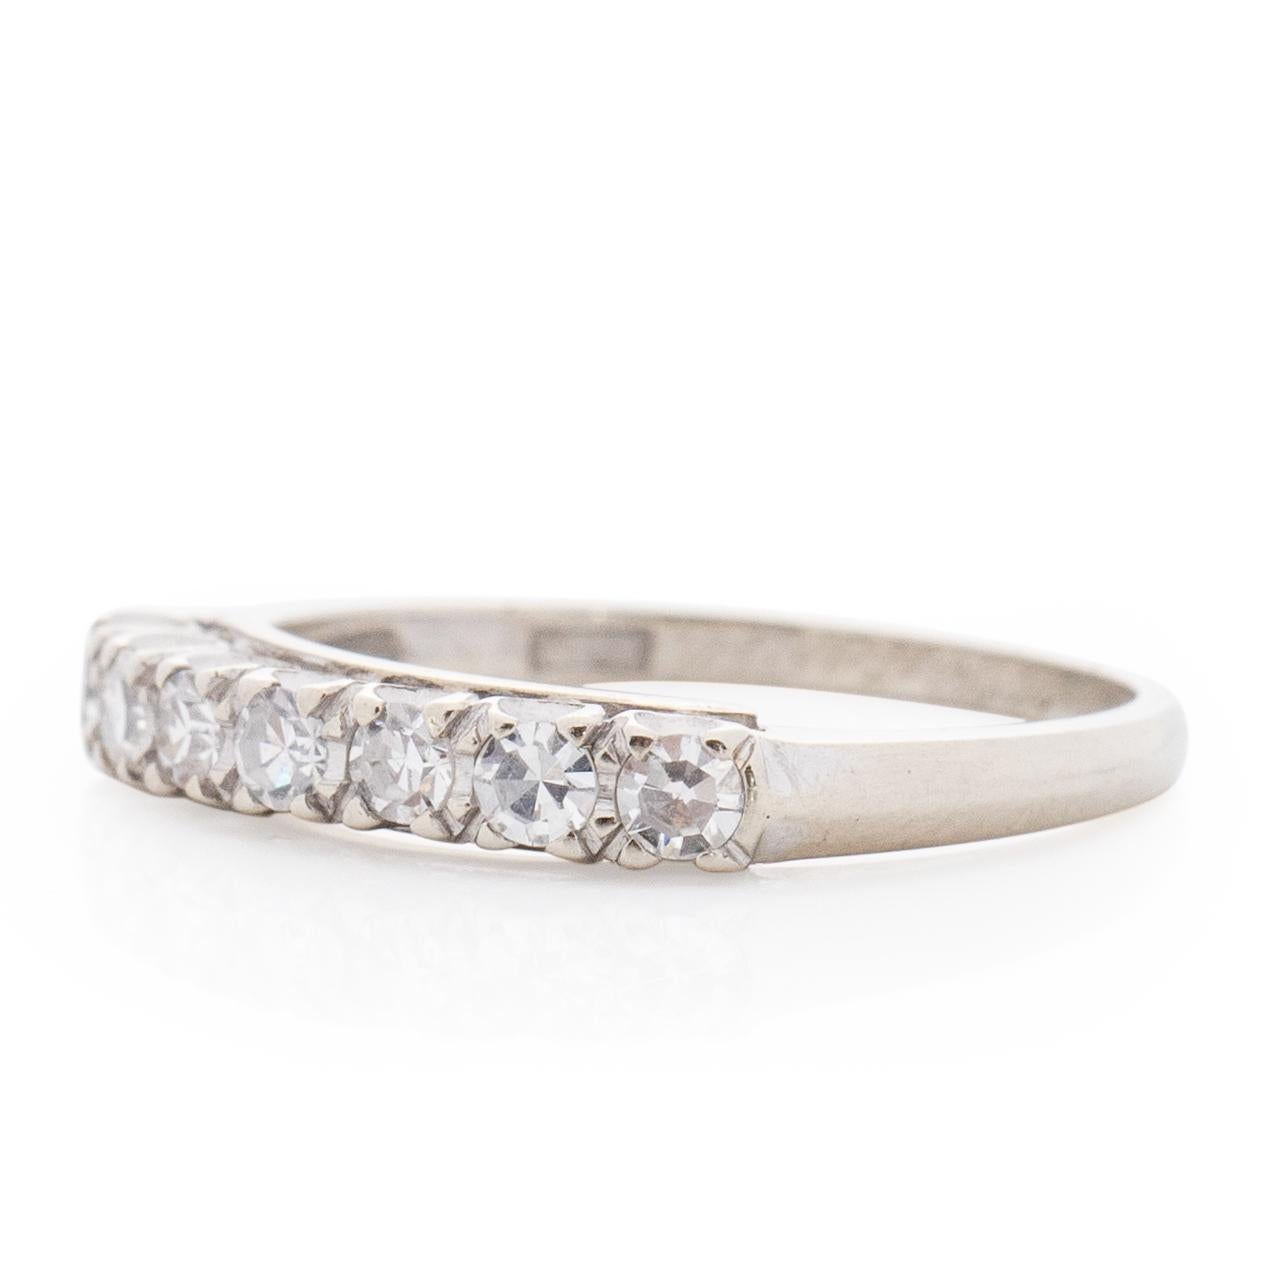 This ring is a classic beauty. Simple and elegant and a perfect ring to pair up with a vintage engagement ring. Crafted in 14K white gold this fish tail style mount holds 7 vibrant diamonds. This ring would also look great stacked with other vintage